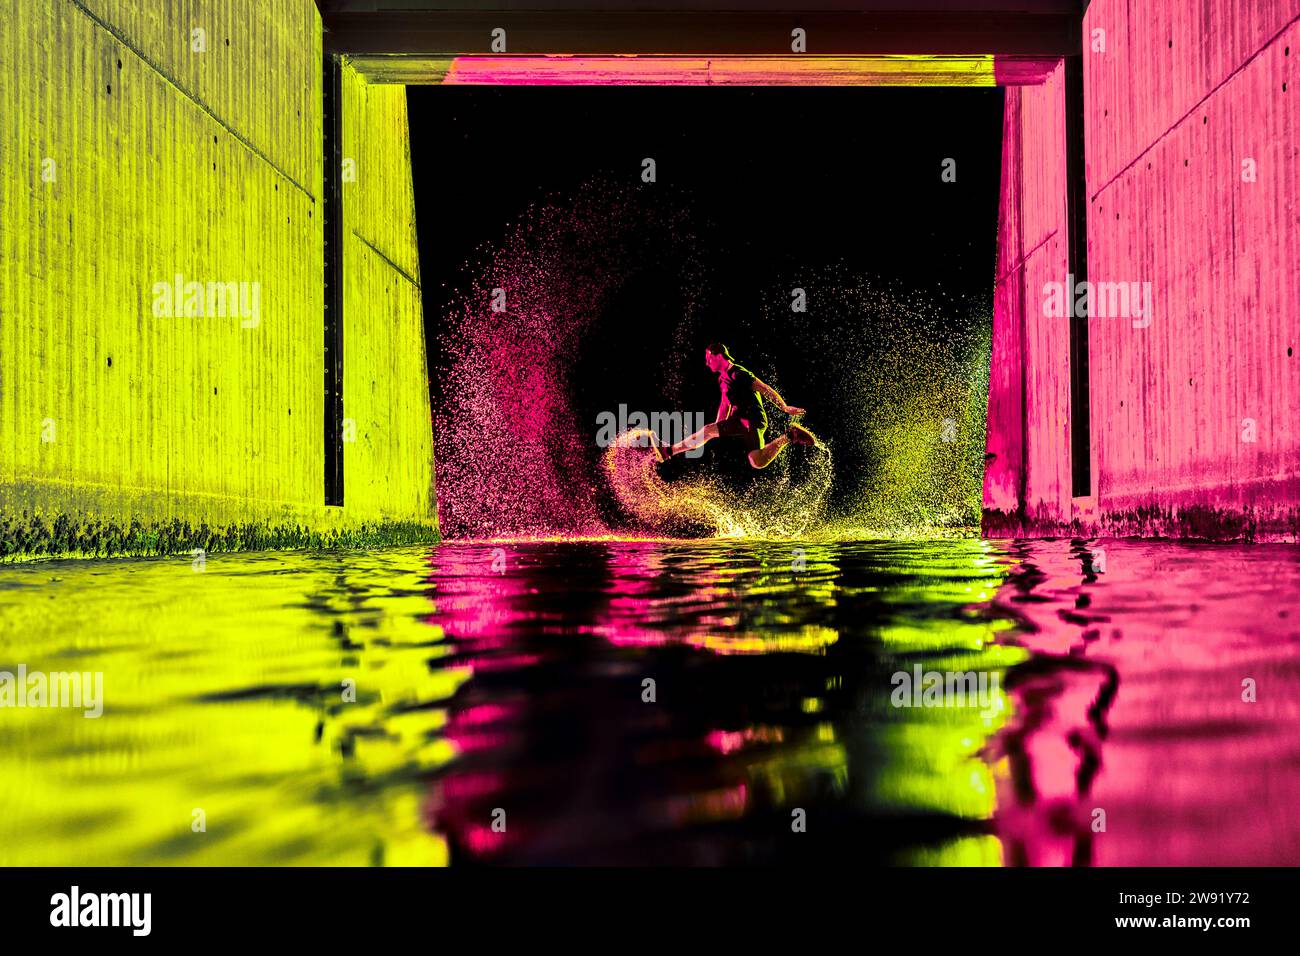 Young man jumping in river water with neon lights under bridge at night Stock Photo